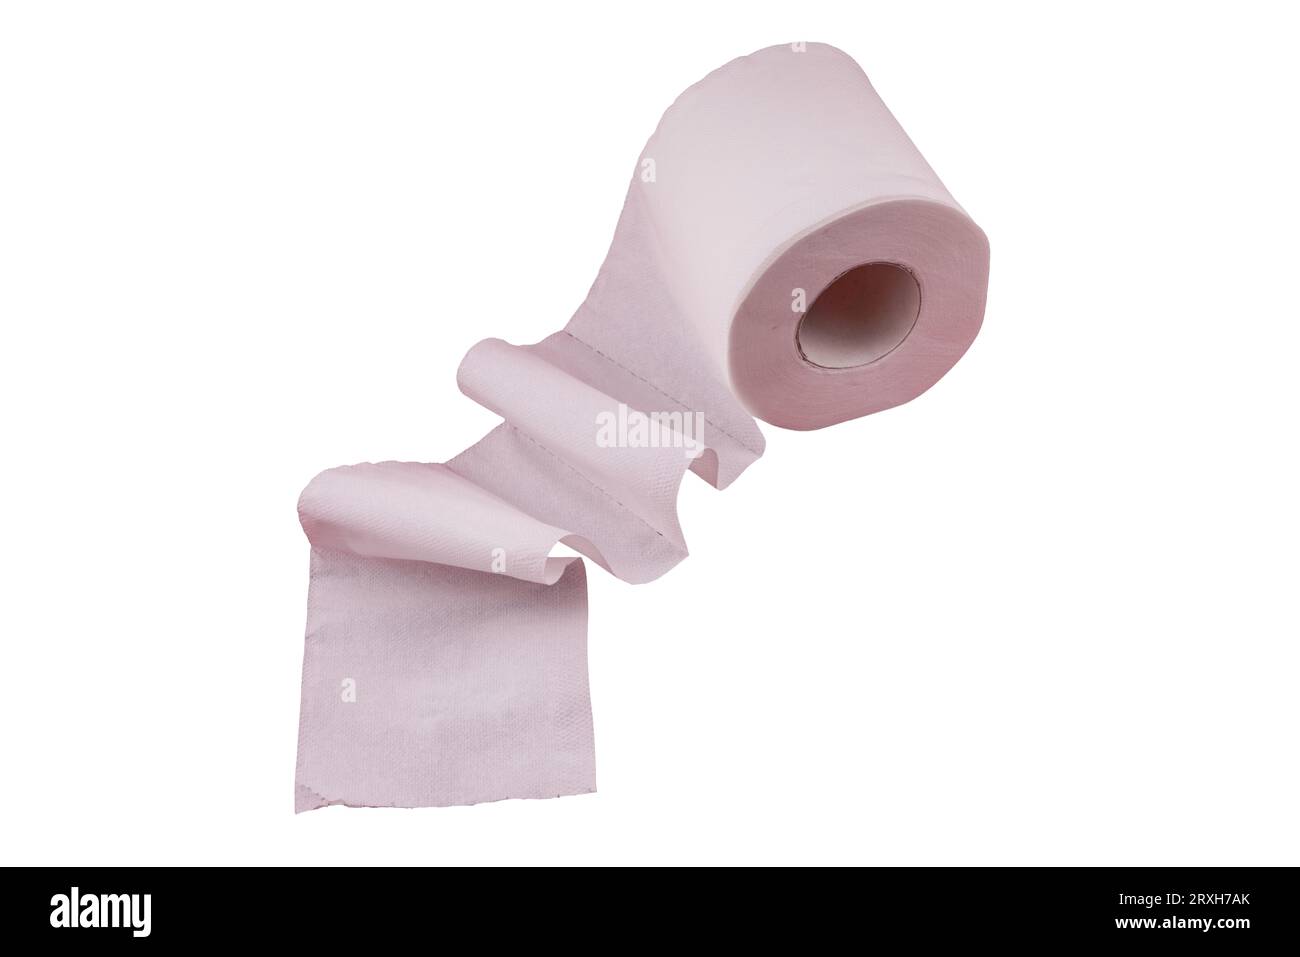 a roll of toilet paper on a transparent background Stock Photo